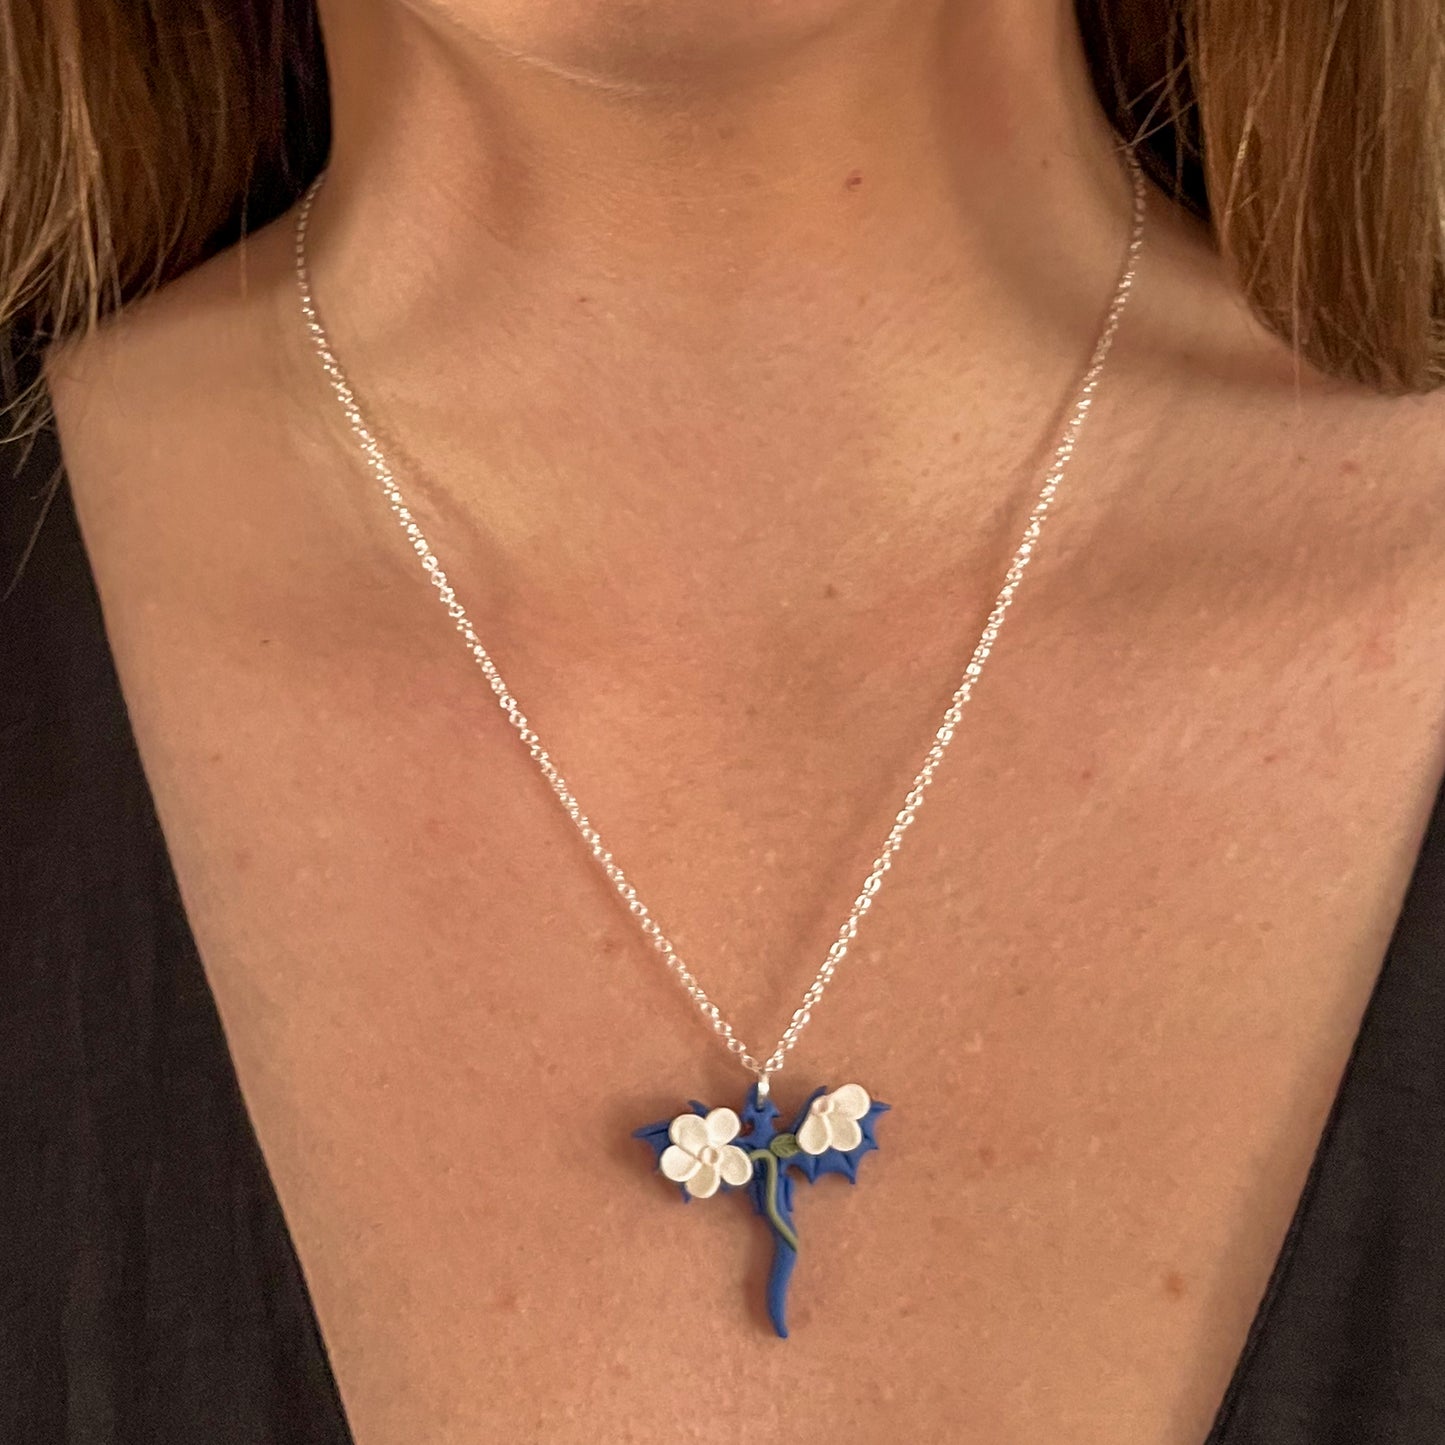 Small blue dragon necklace with white floral details | 18" chain